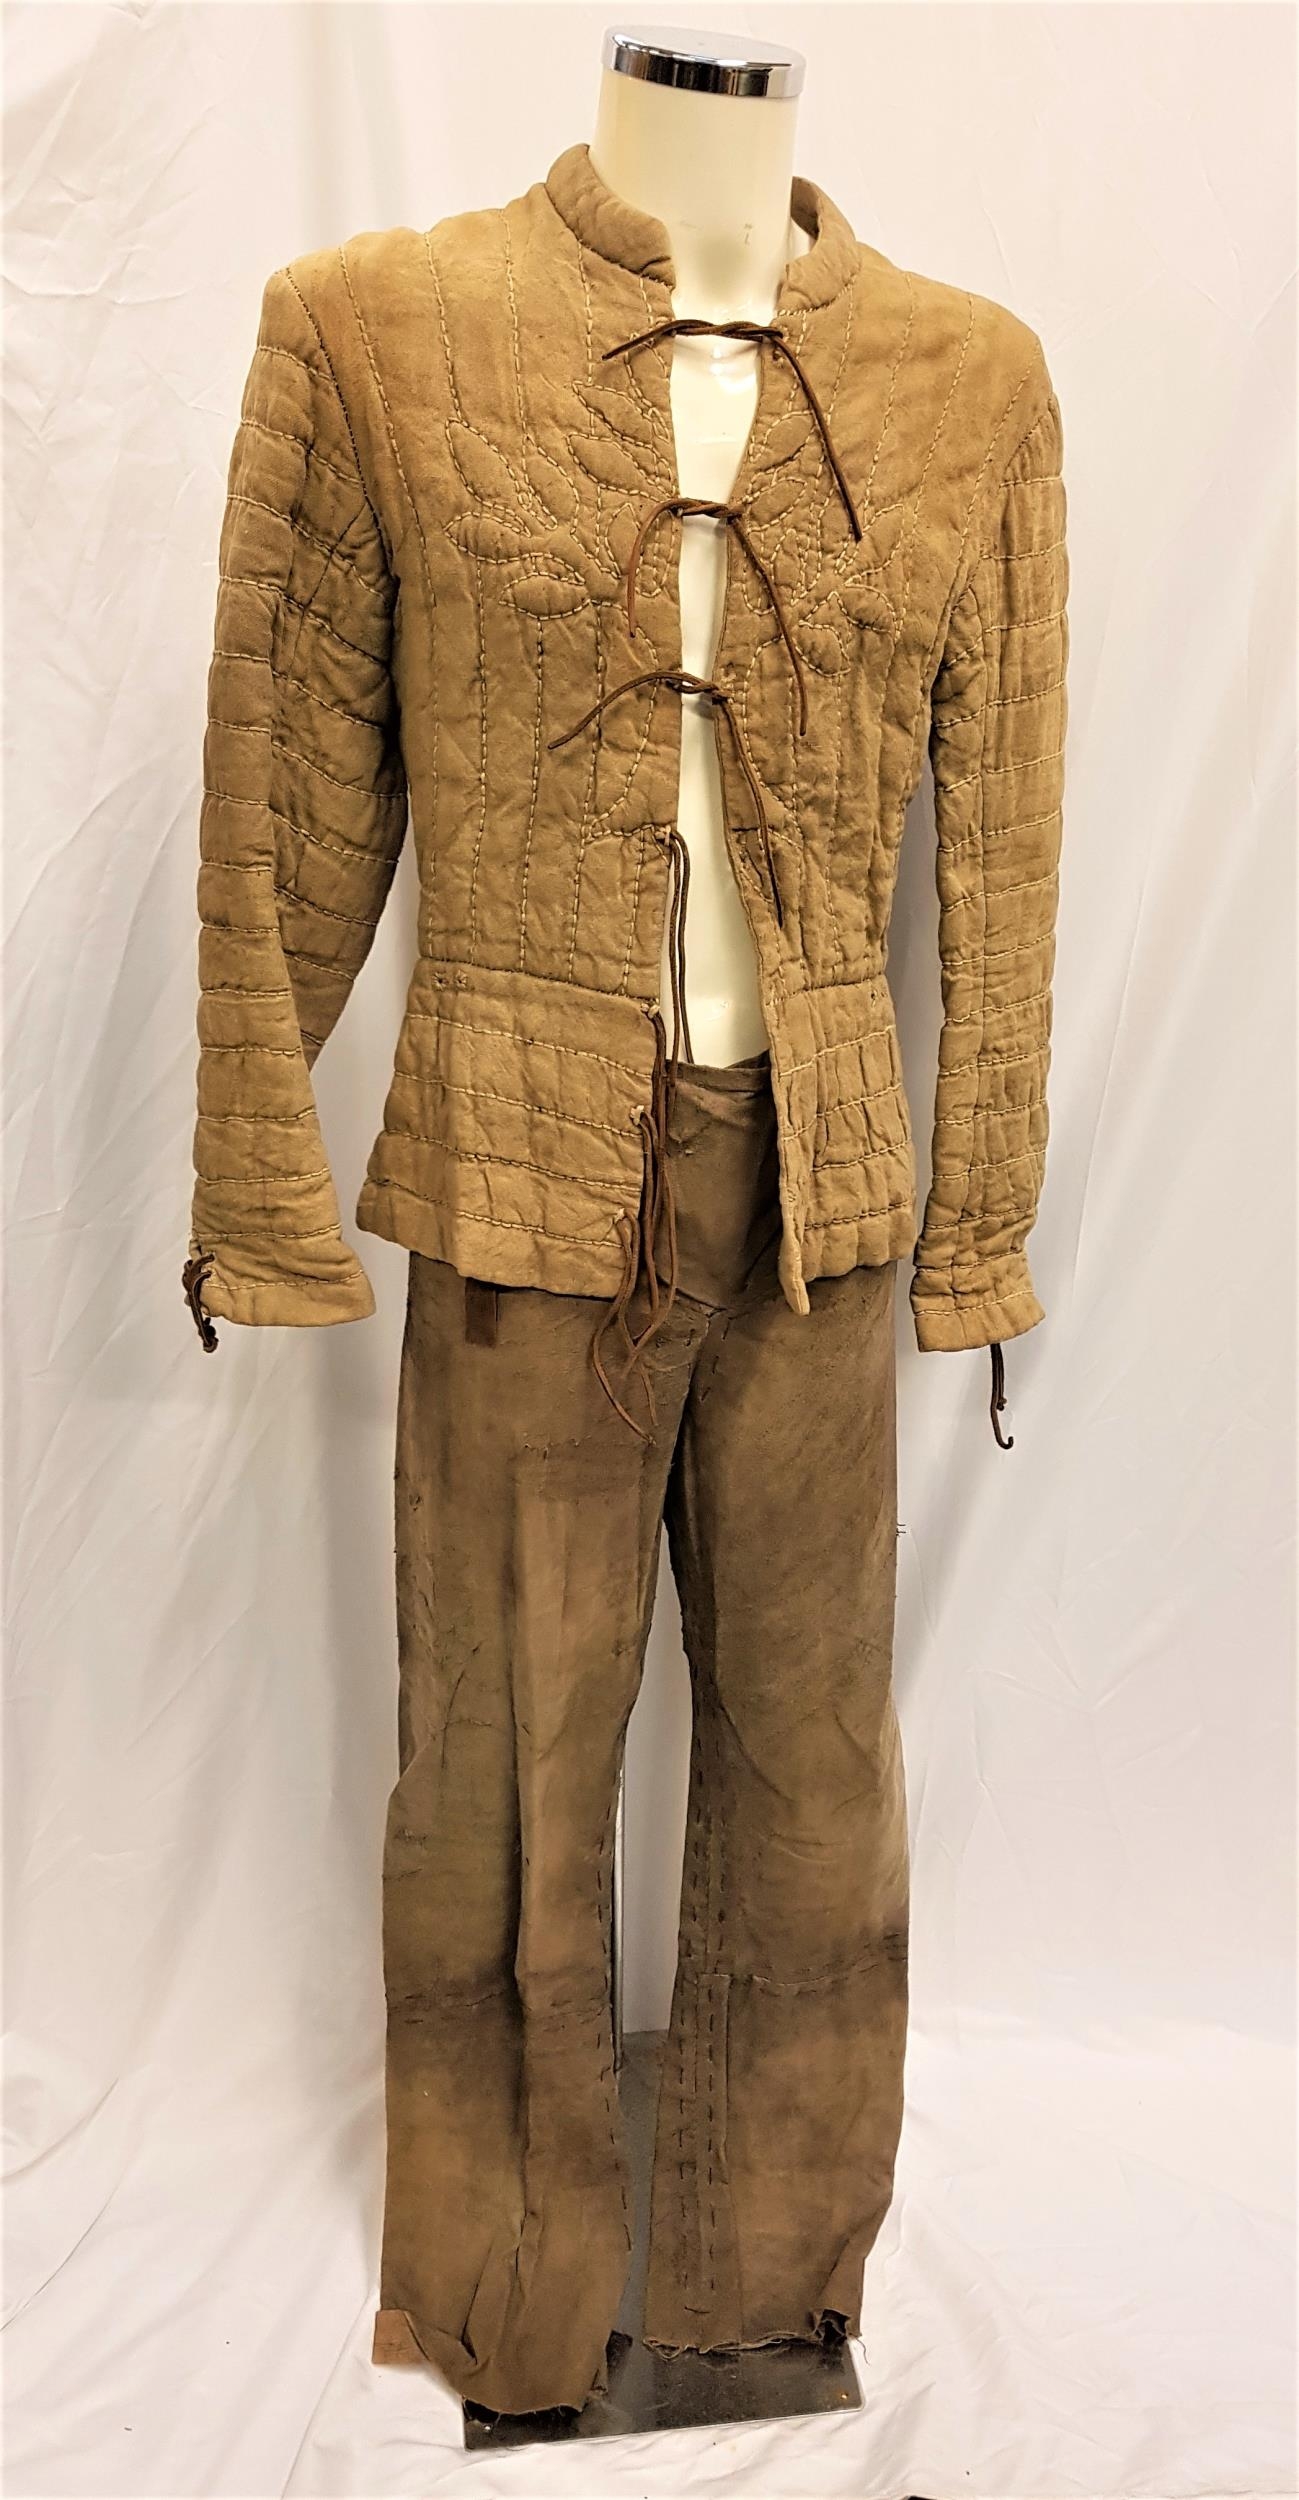 KINGDOM OF HEAVEN (2005) - BALIAN DE IBELIN'S HANDMADE 6 PIECE OUTFIT INCLUDING SHOES - PLAYED BY